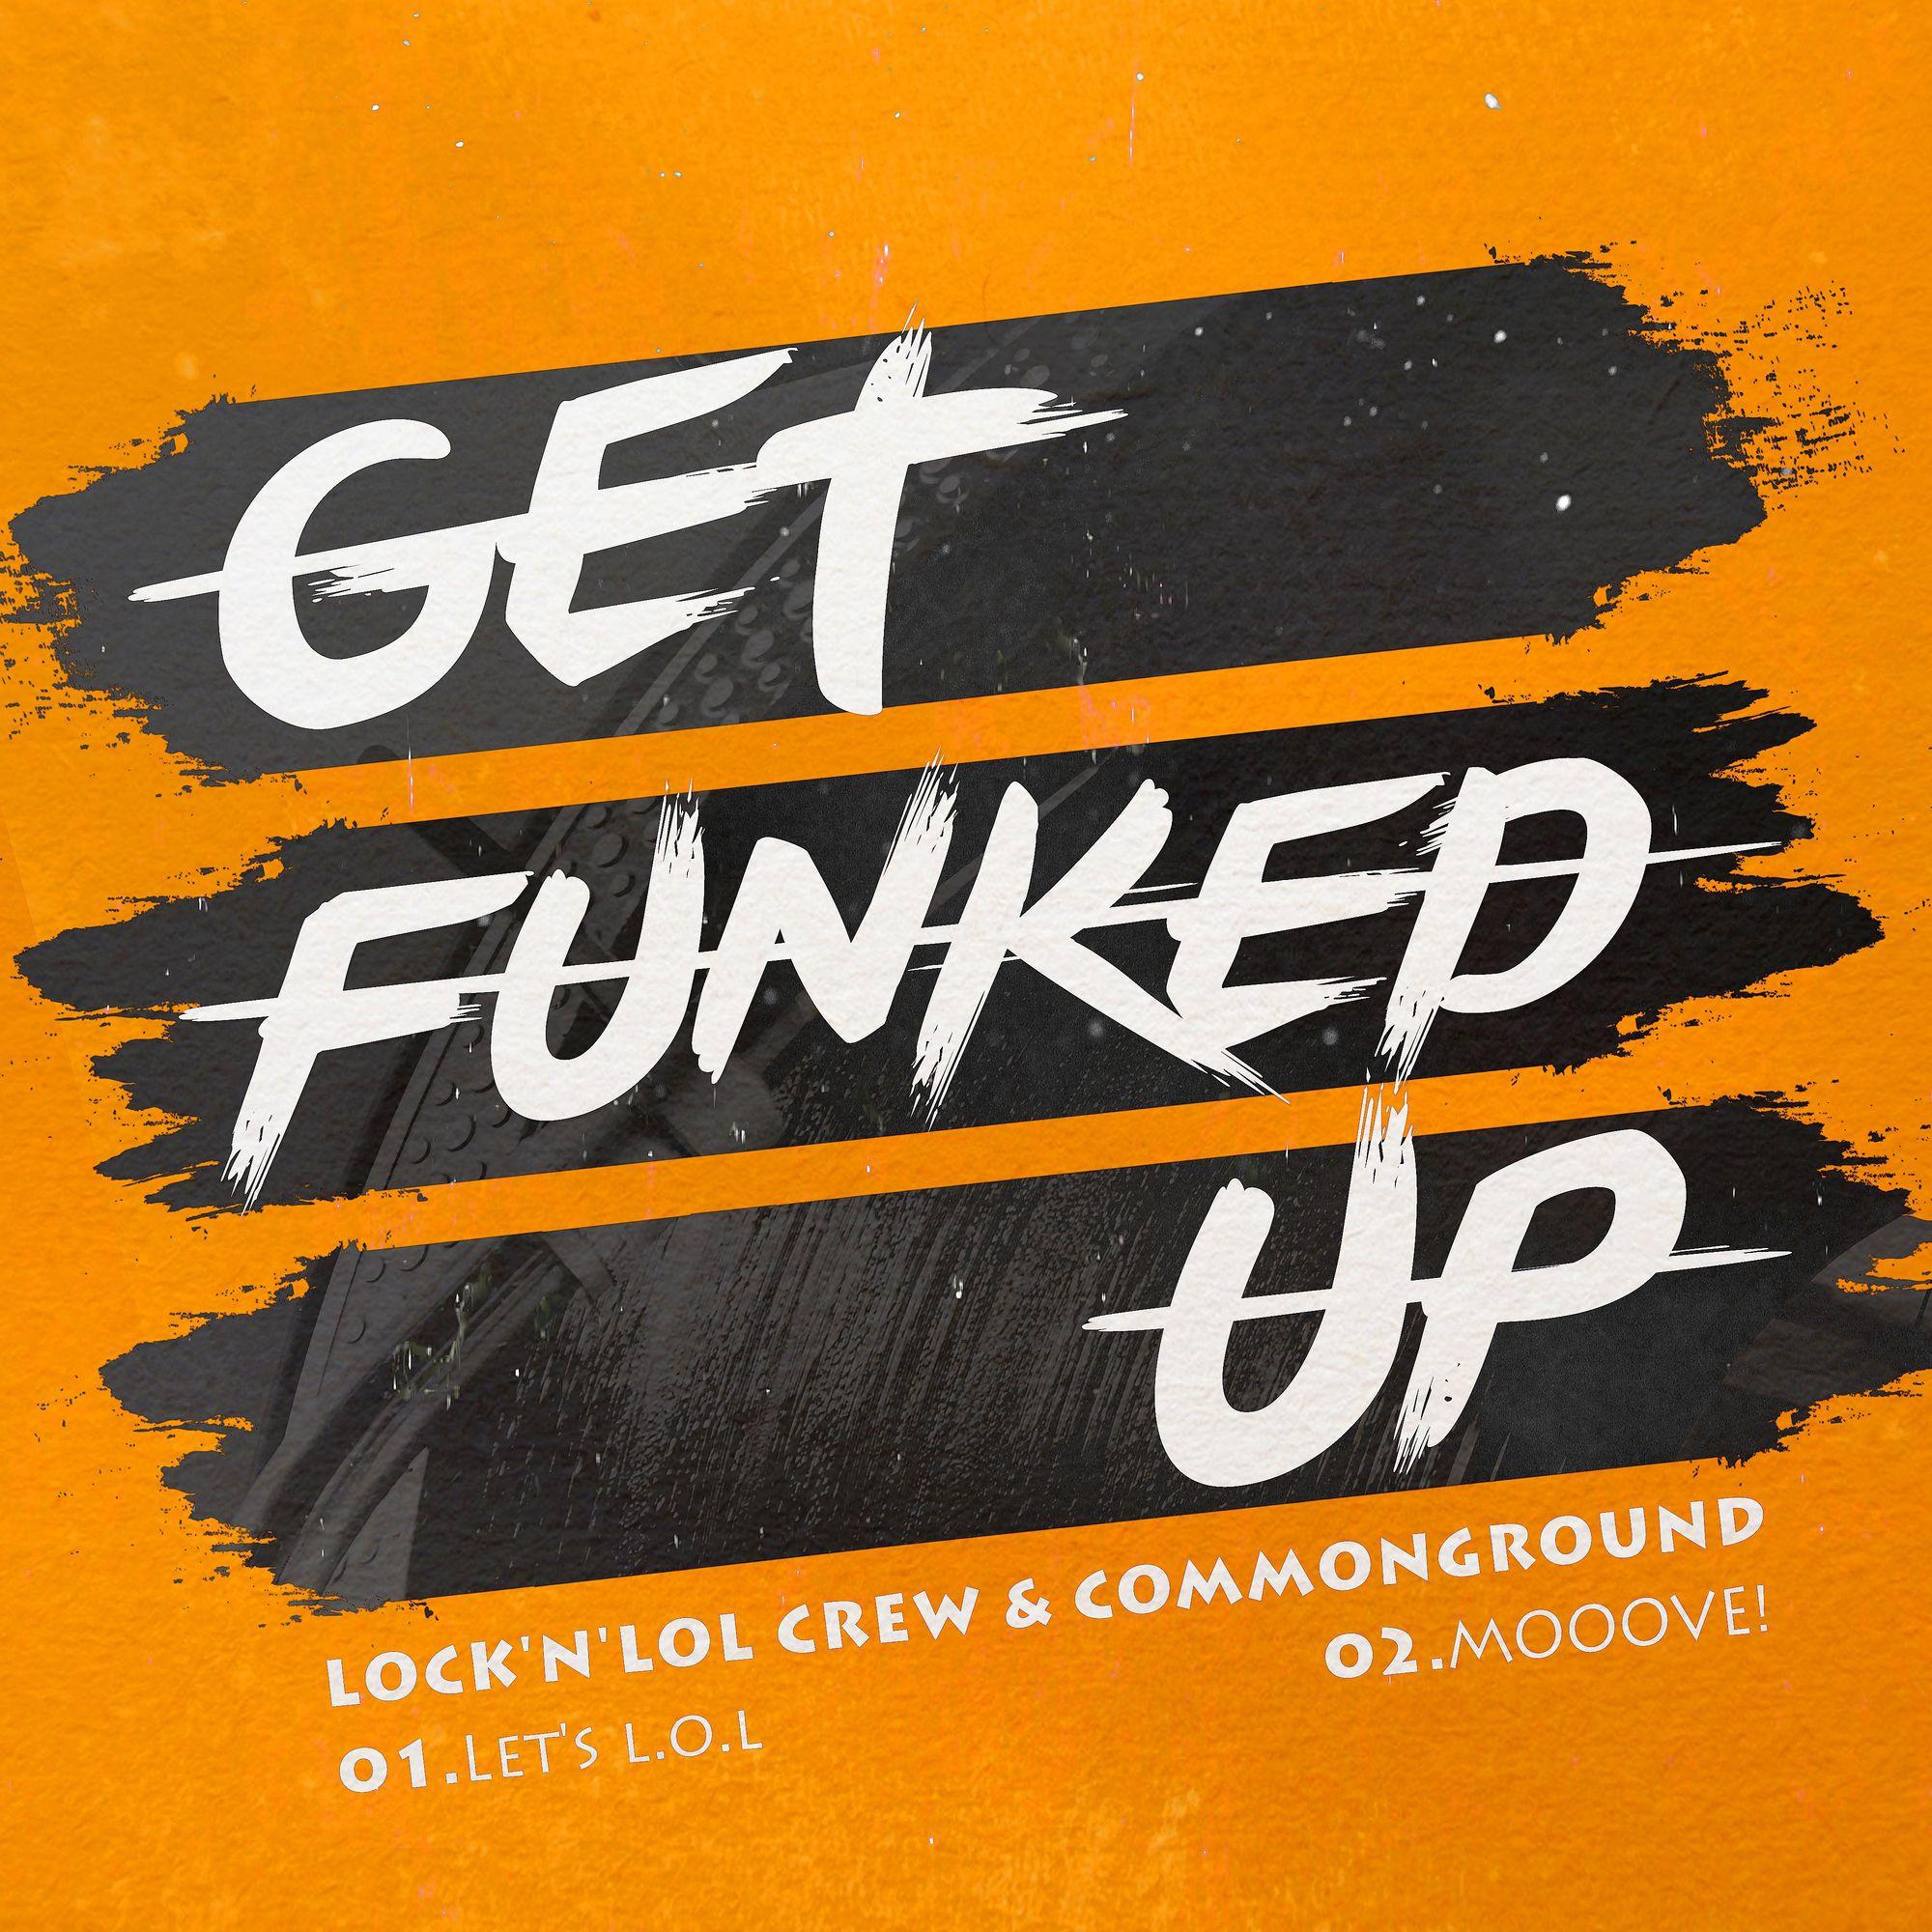 Funked up remix. Funked up обложка. Funked up обложка музыки. Песня Funked up обложка. Обложка песни Funked up.